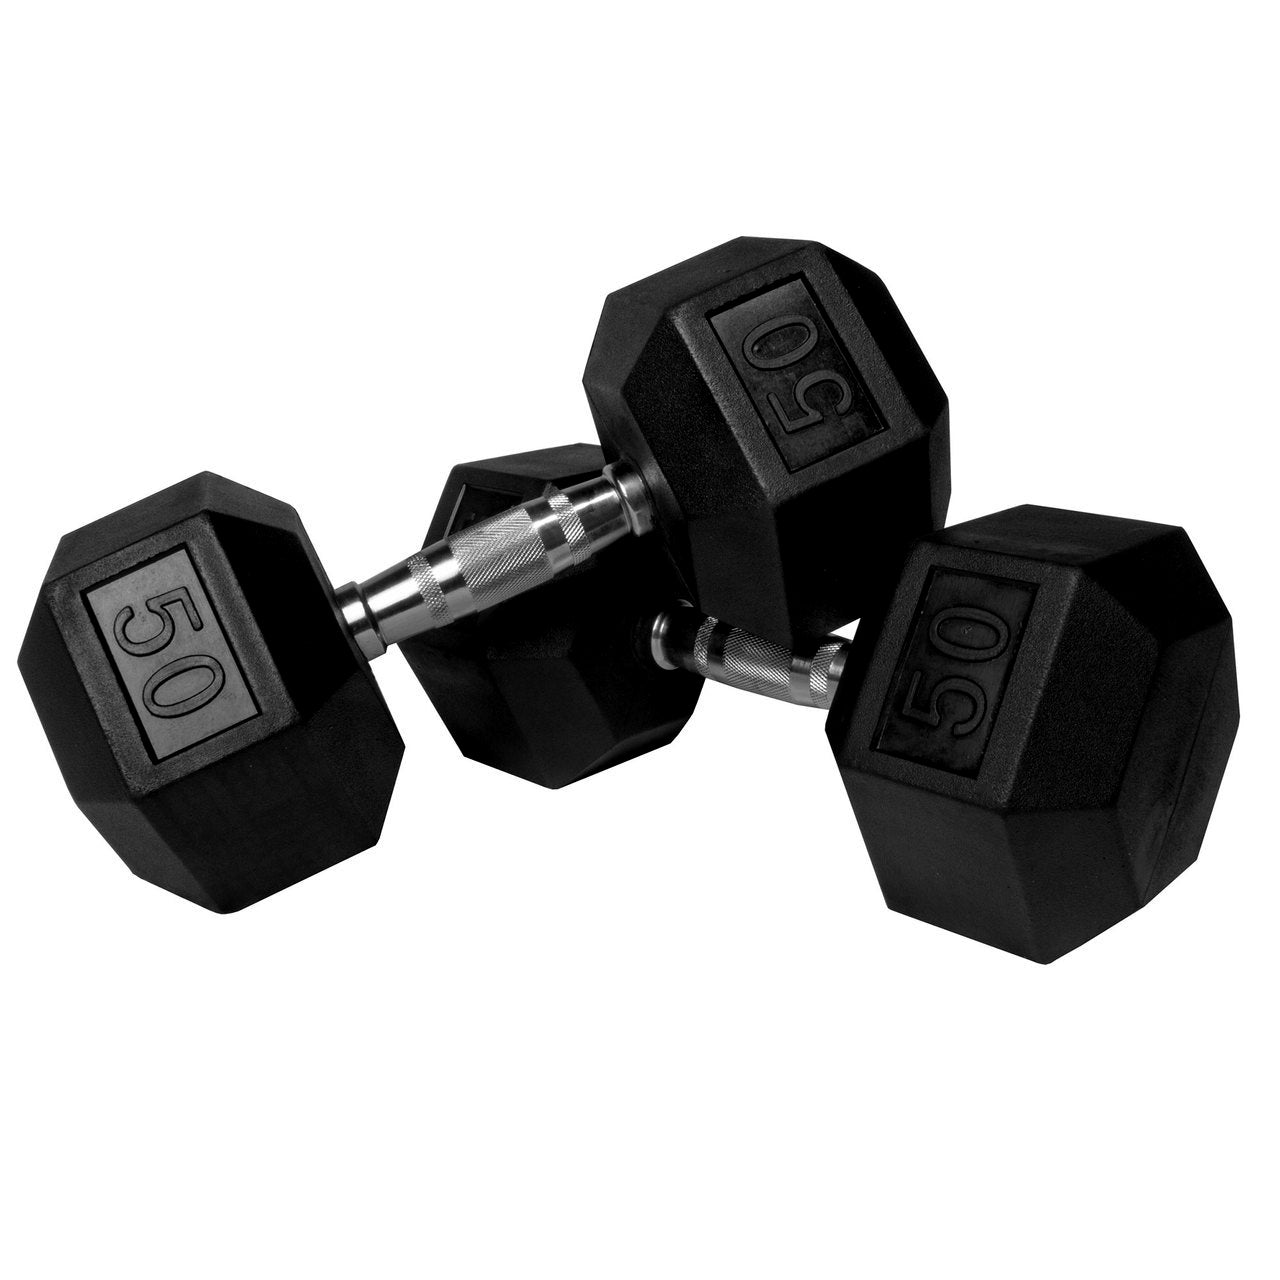 Prosportsae Rubber Hex Dumbbells 5 to 50 Pounds - Sold In Pairs (2 Pcs)